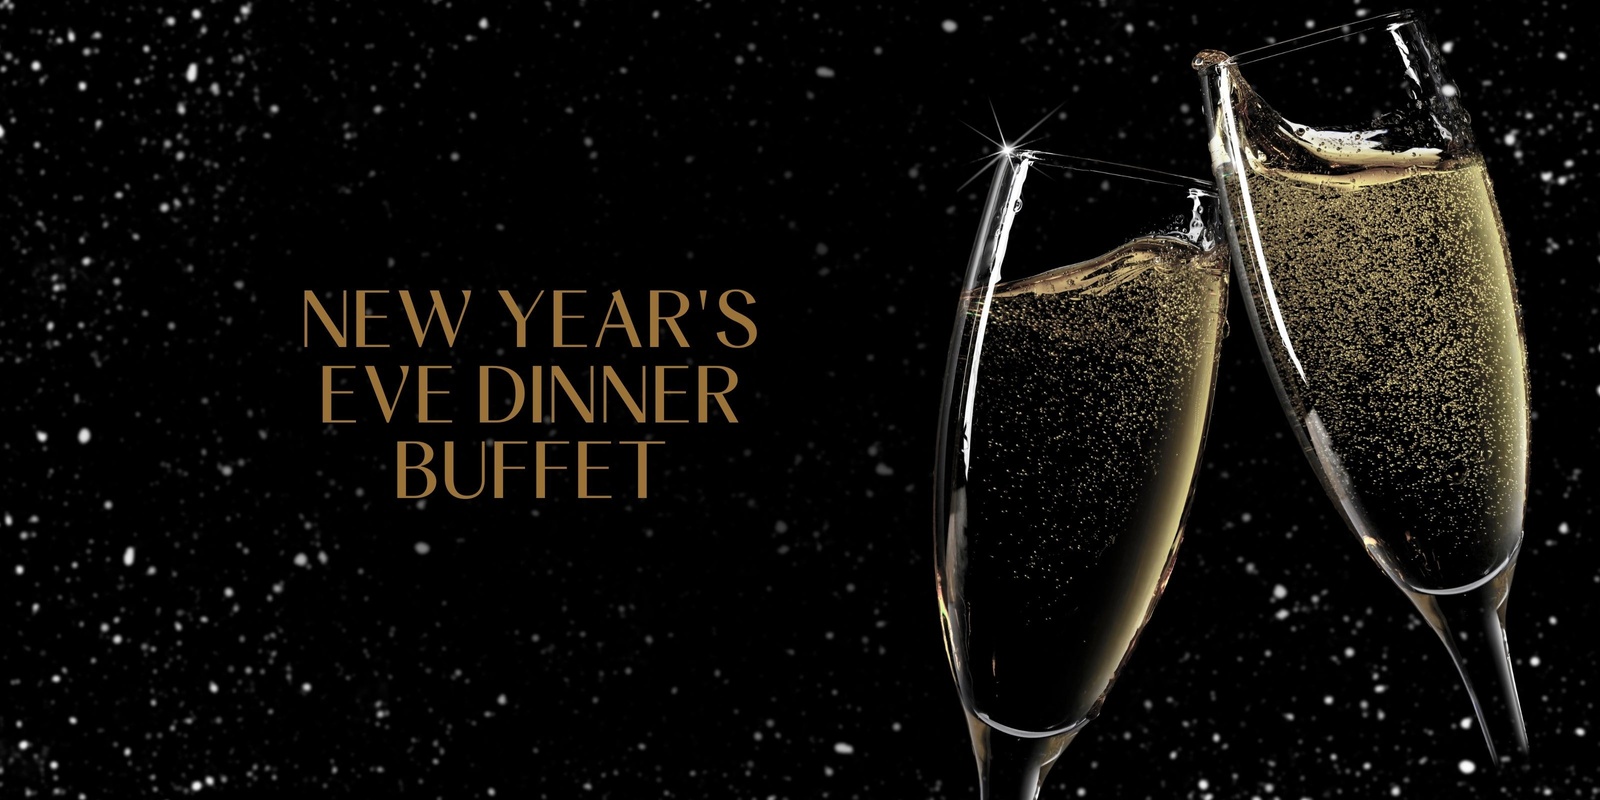 Banner image for New Year’s Eve dinner buffet at Amora